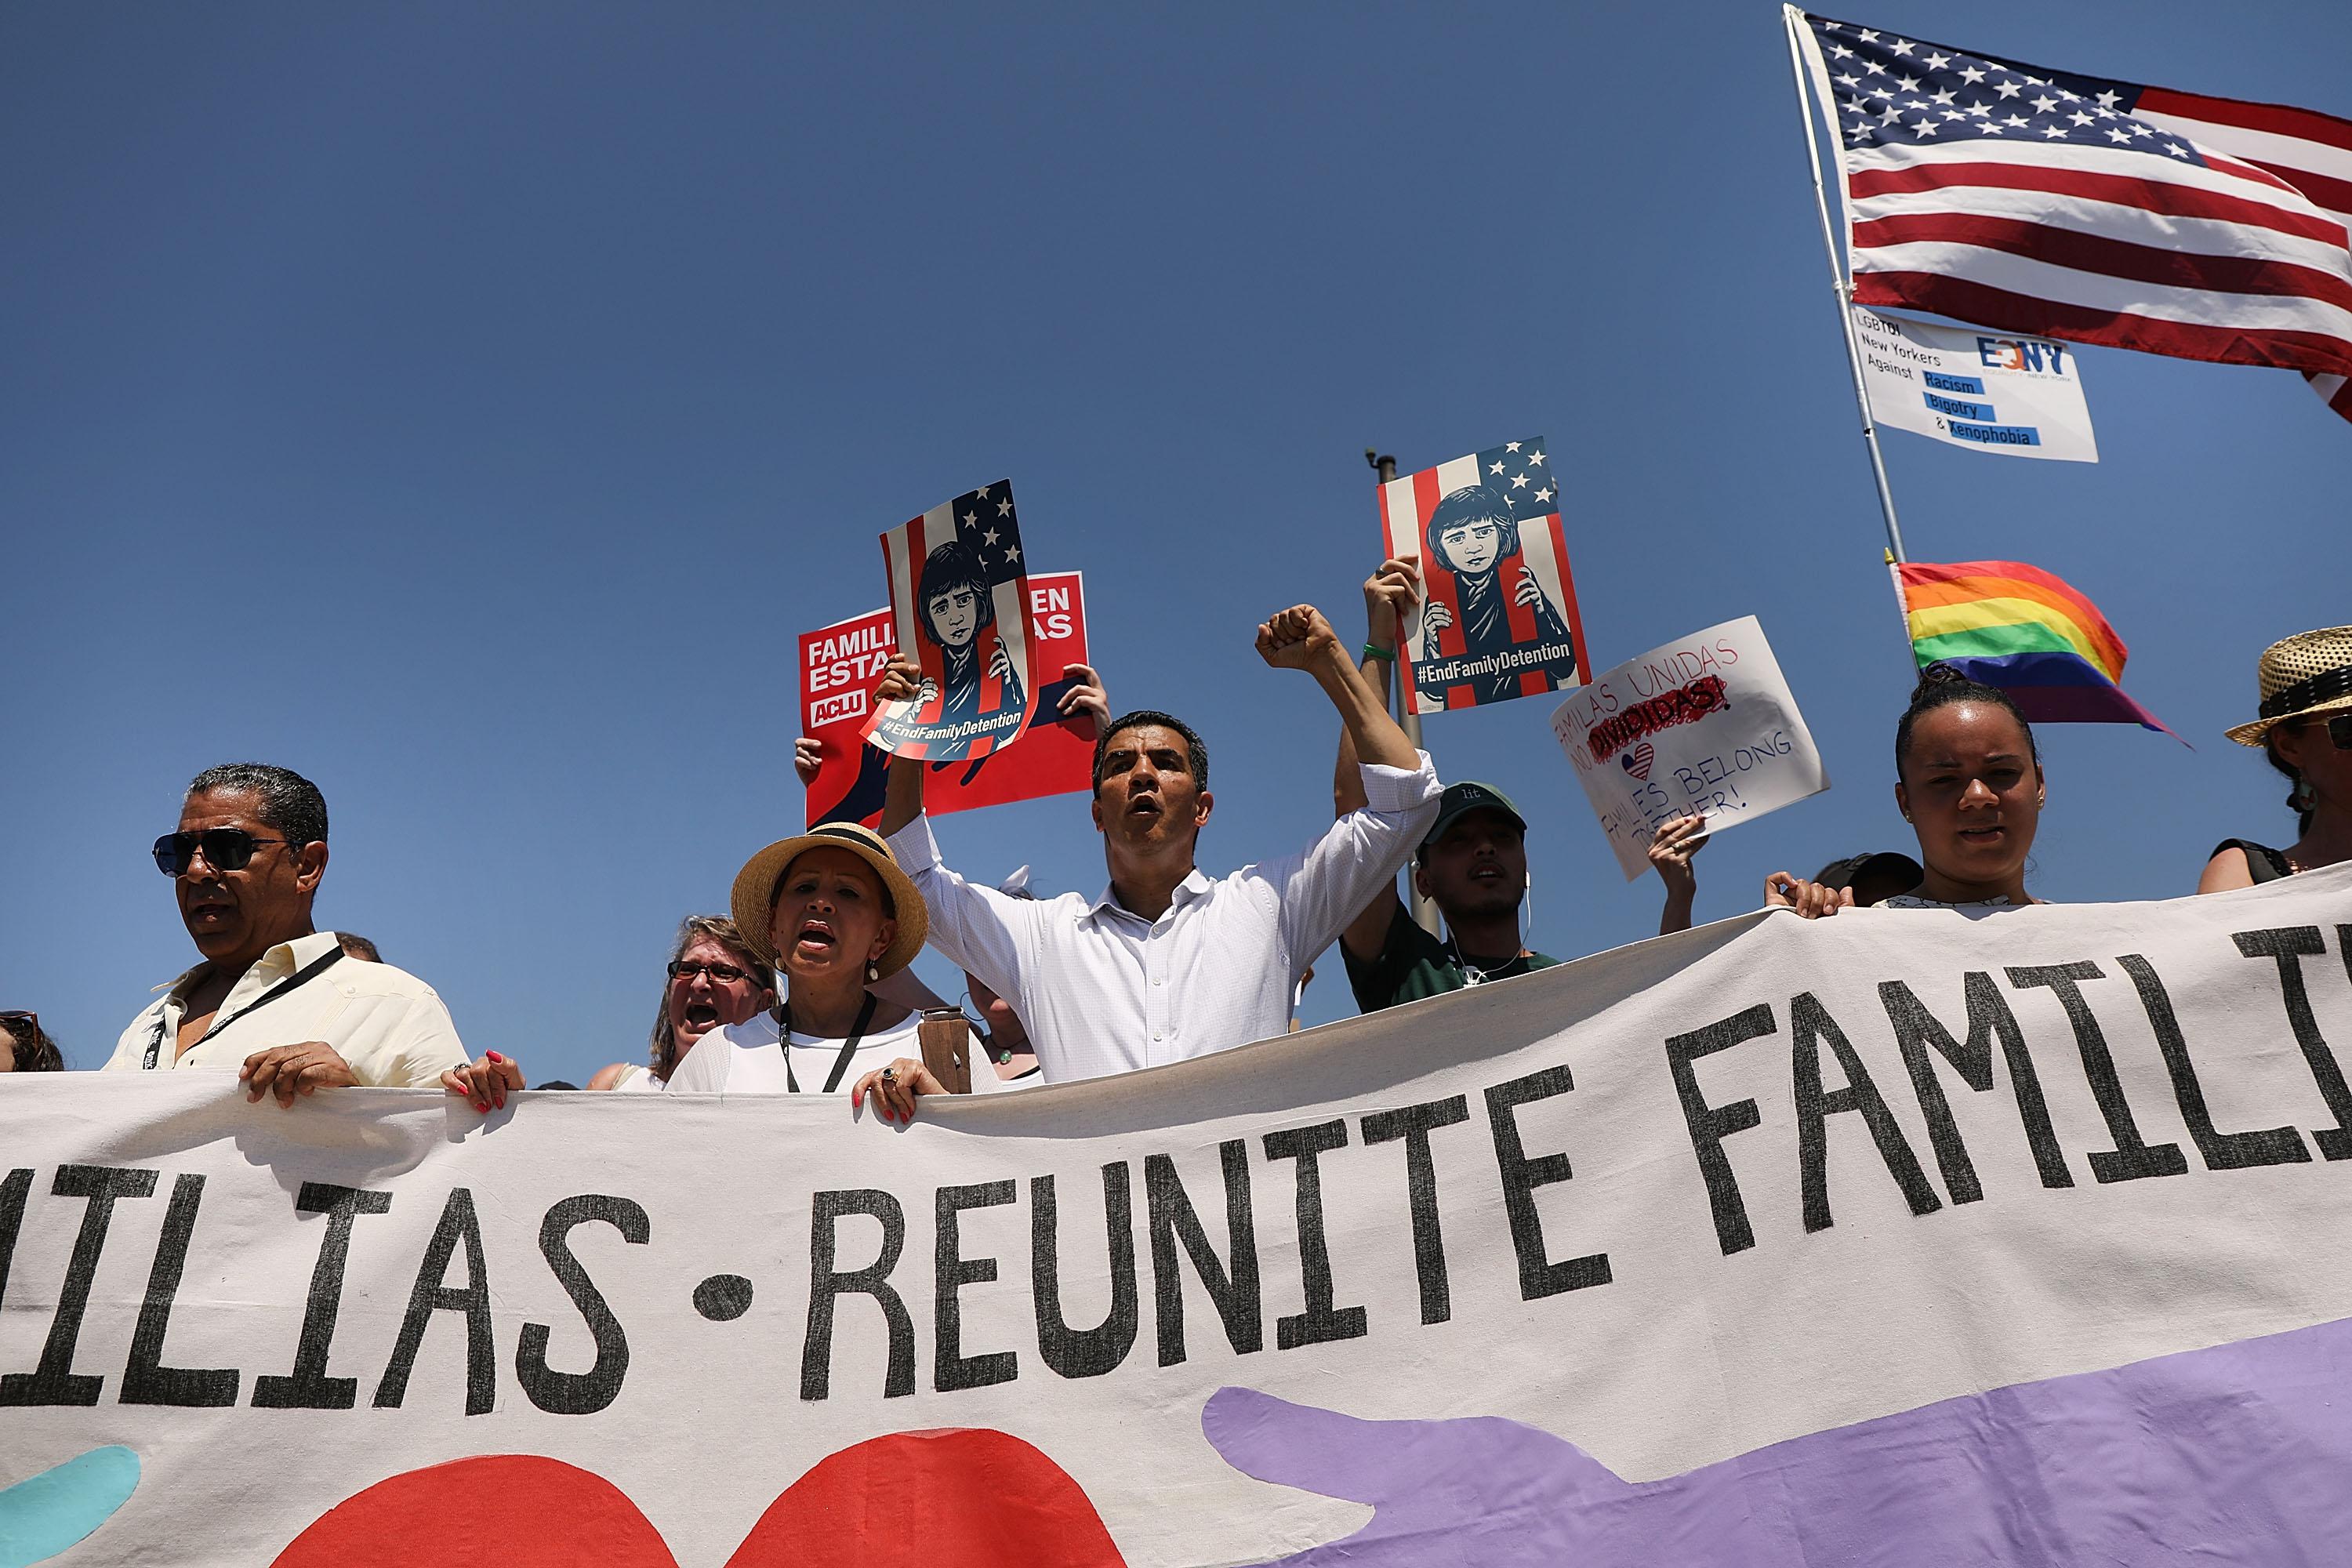 Protesters march with a banner that says "Reunite Families."